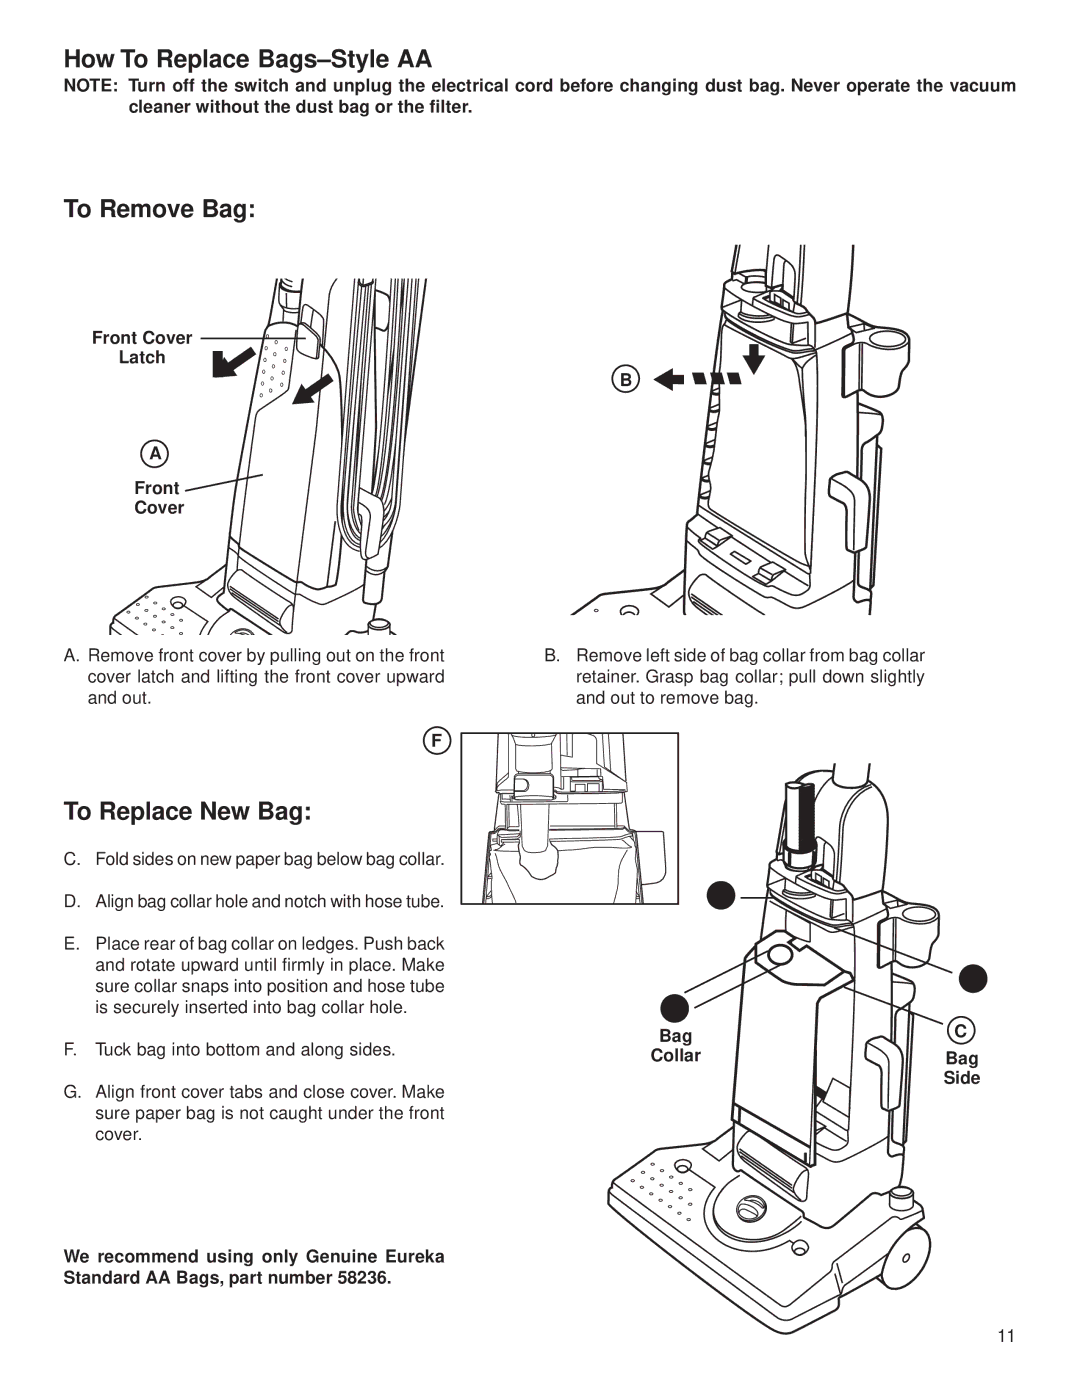 Eureka 4500 warranty How To Replace Bags-Style AA To Remove Bag, To Replace New Bag, Front Cover Latch, Bag Collar 